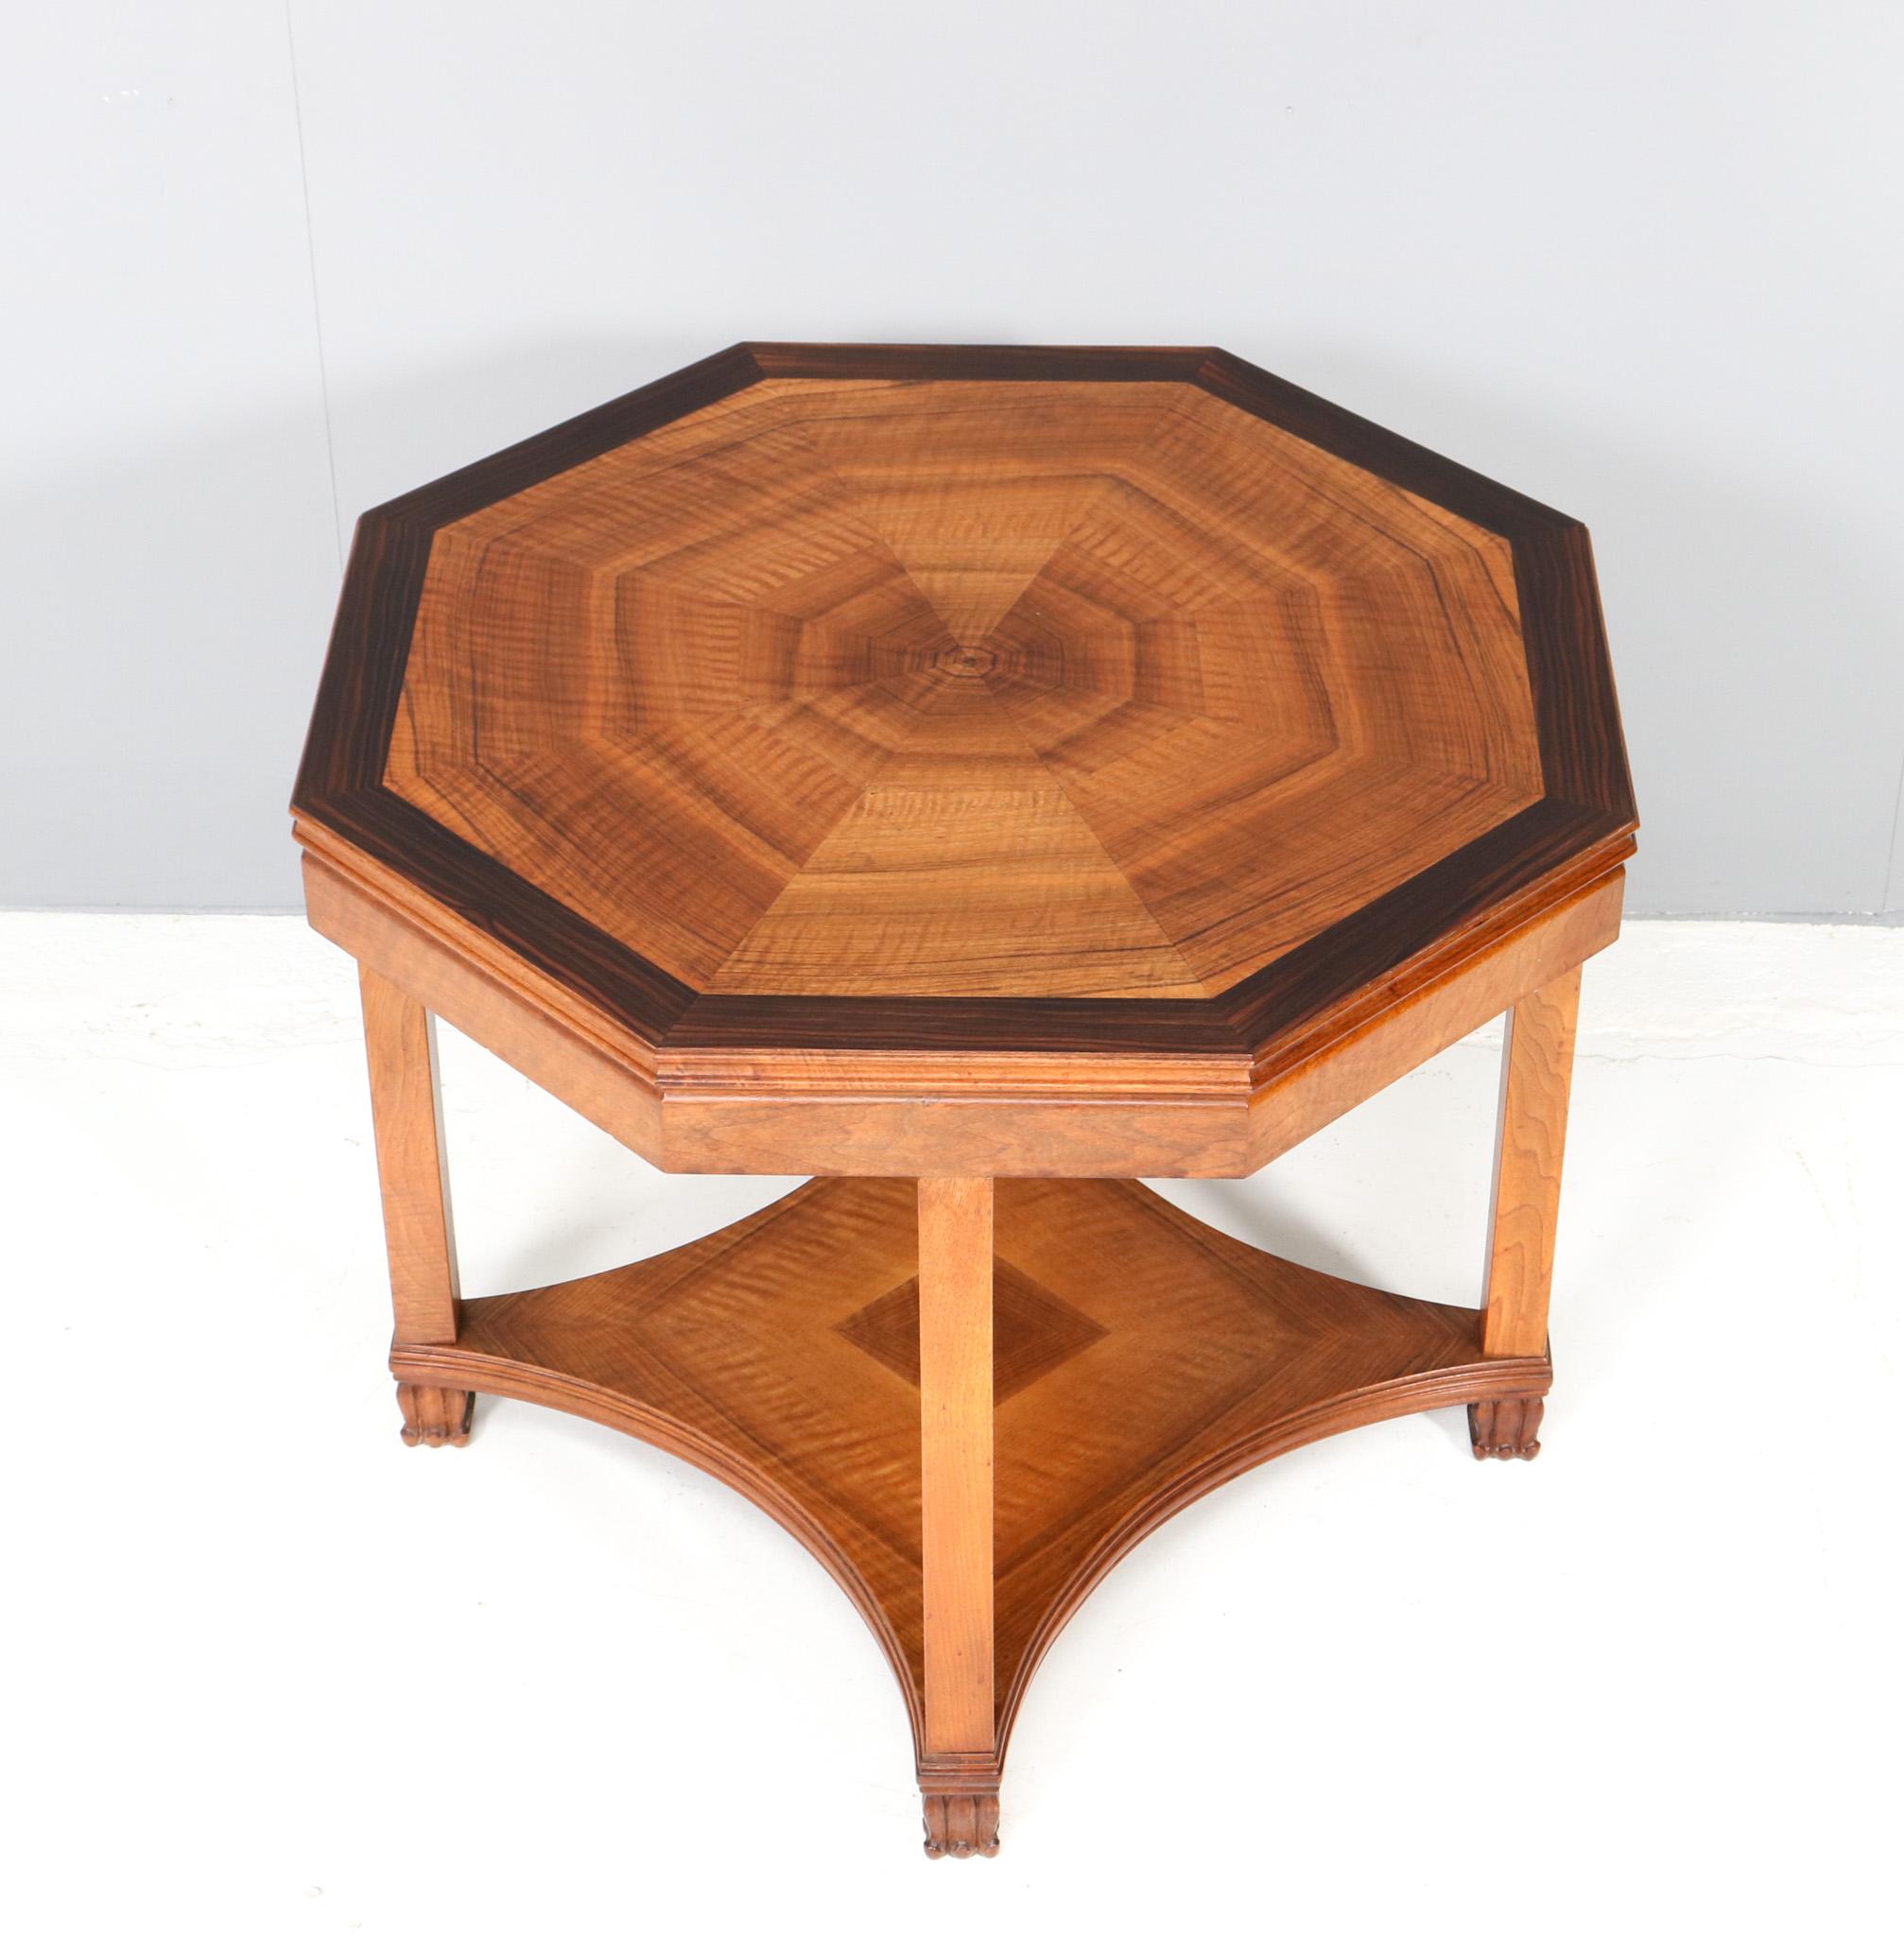 Magnificent and rare Art Deco Amsterdamse School coffee table.
Design by 't Woonhuys Amsterdam.
Striking Dutch design from the 1920s.
Solid walnut base with original walnut and macassar ebony veneered top.
This wonderful Art Deco Amsterdamse School